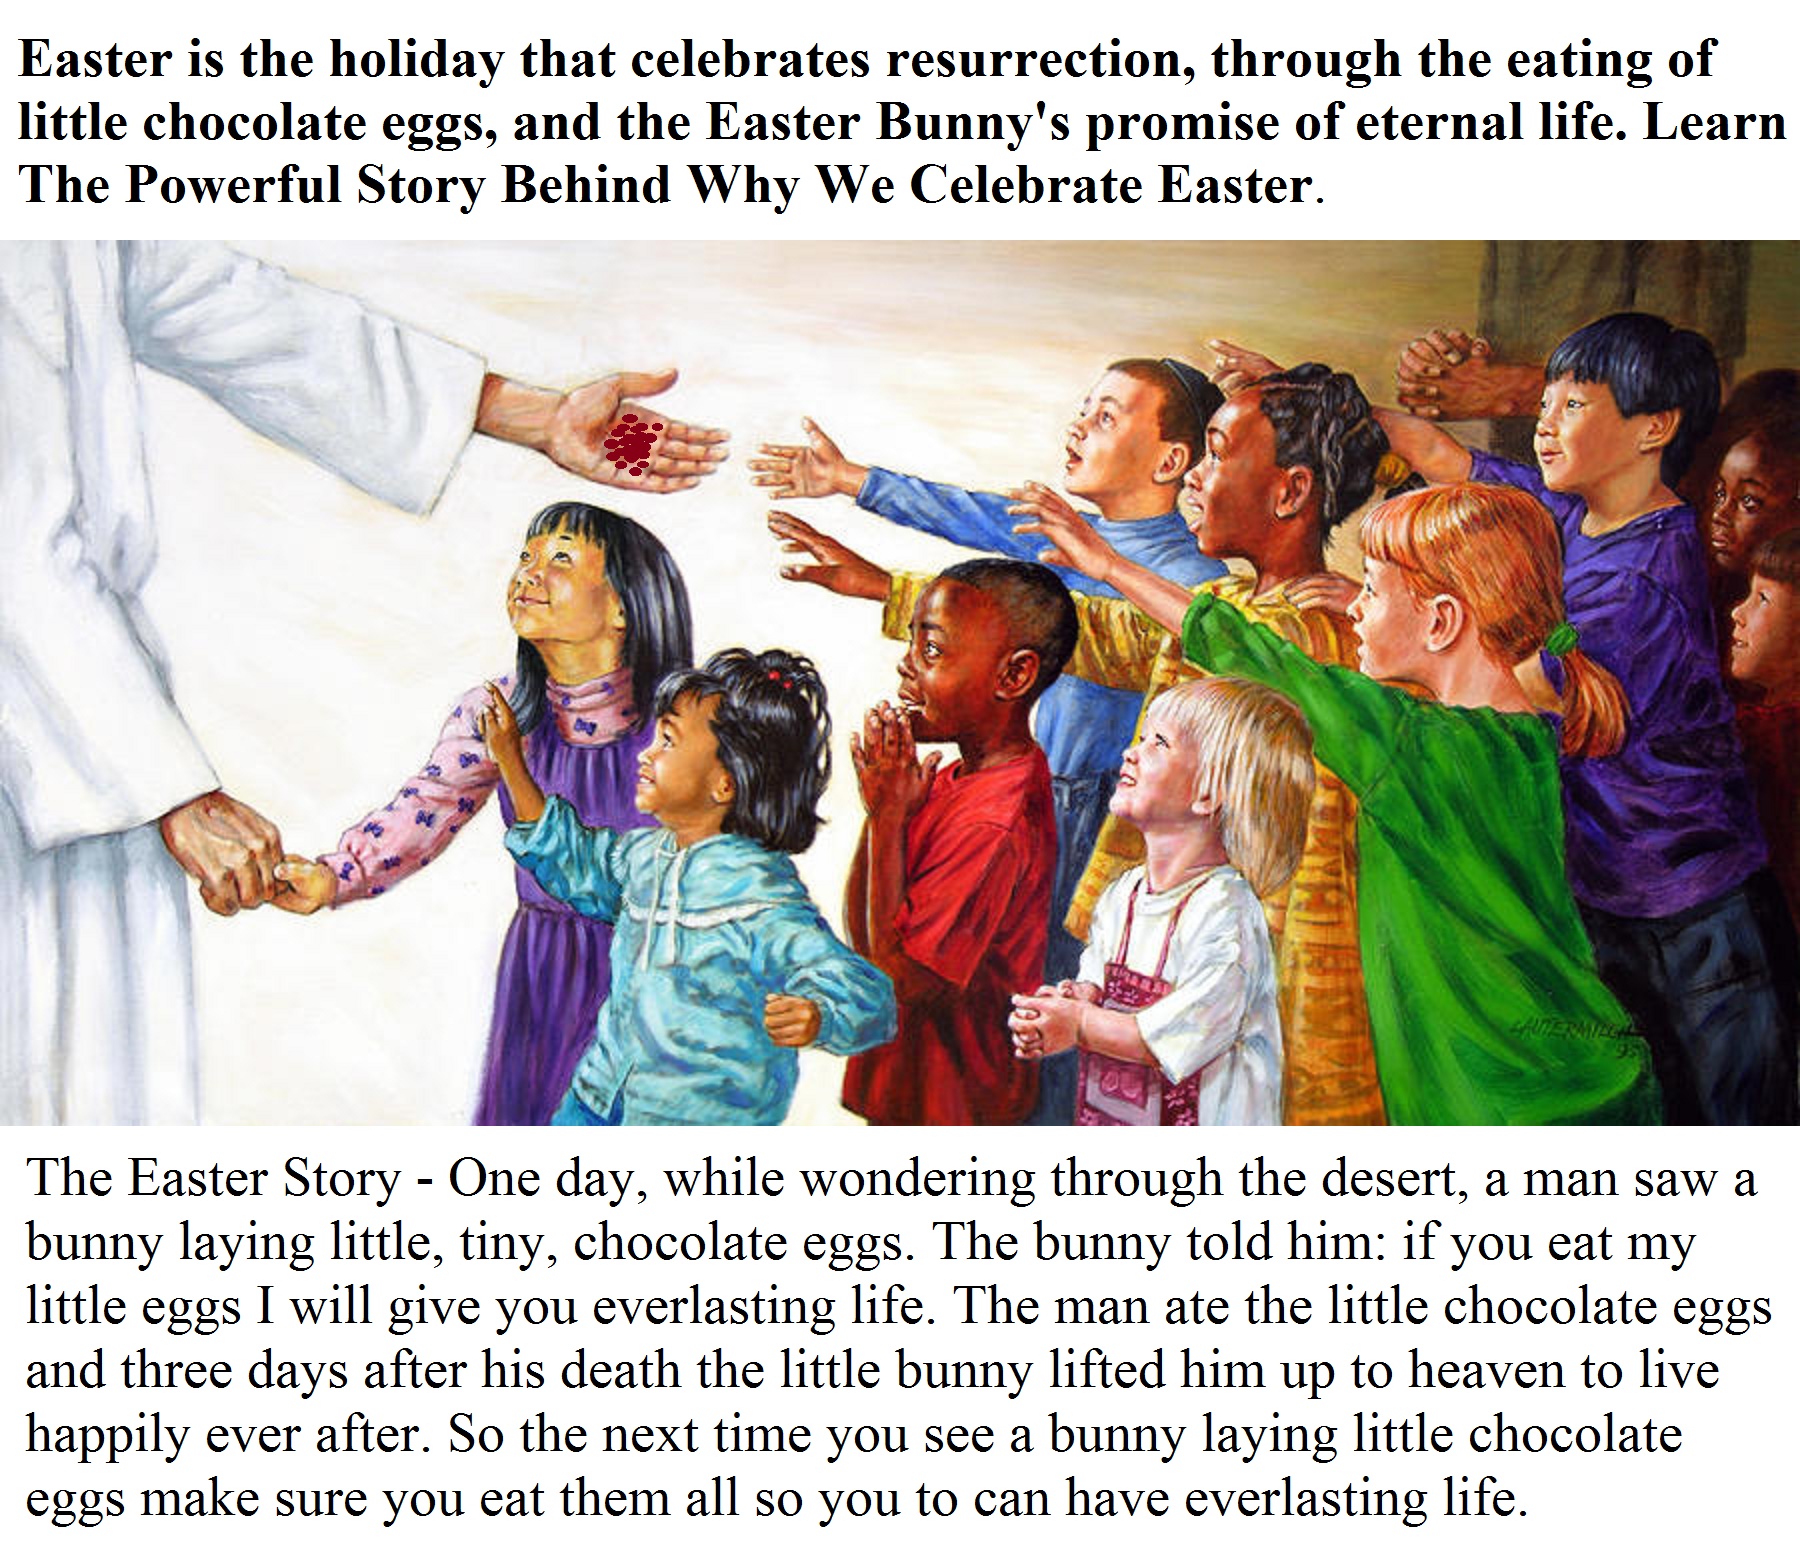 Easter is the holiday that celebrates resurrection, through the eating of little chocolate eggs, and the Easter Bunny's promise of eternal life. Learn The Powerful Story Behind Why We Celebrate Easter.